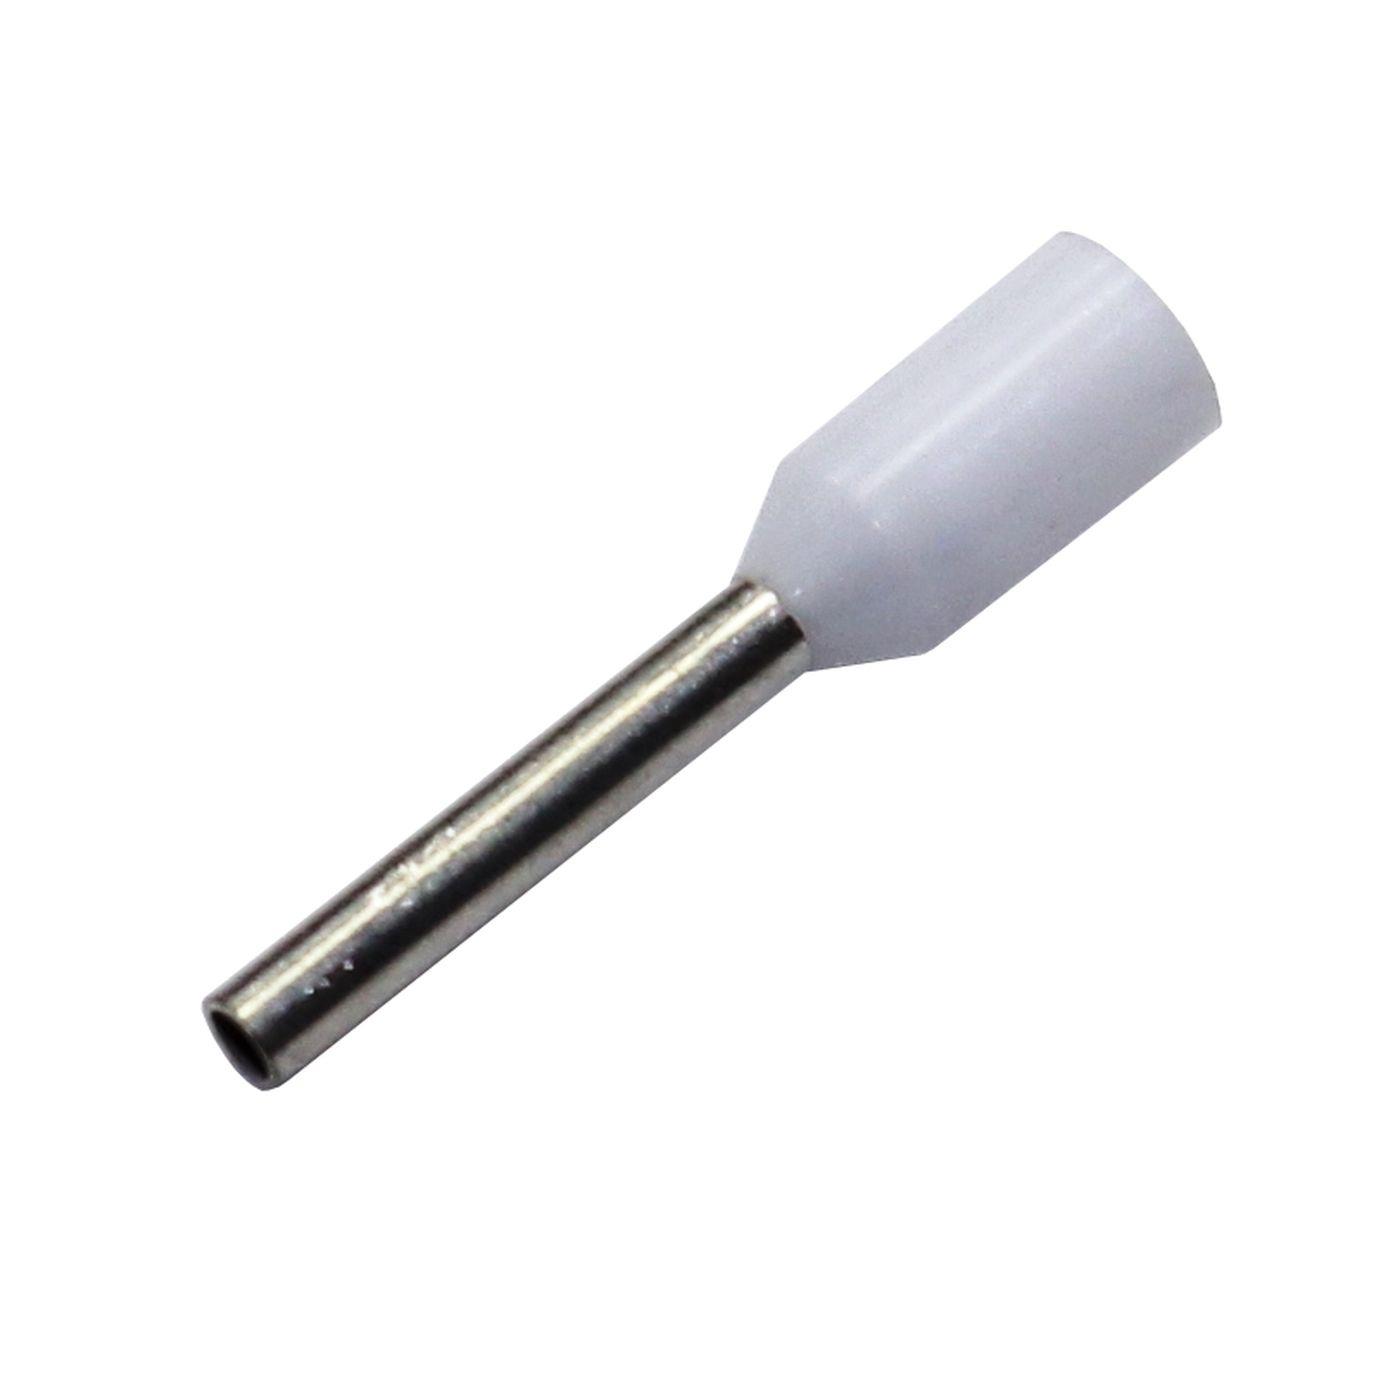 100x Wire end ferrule isolated 0,5mm² White Copper tinned 1x8mm Sleeve